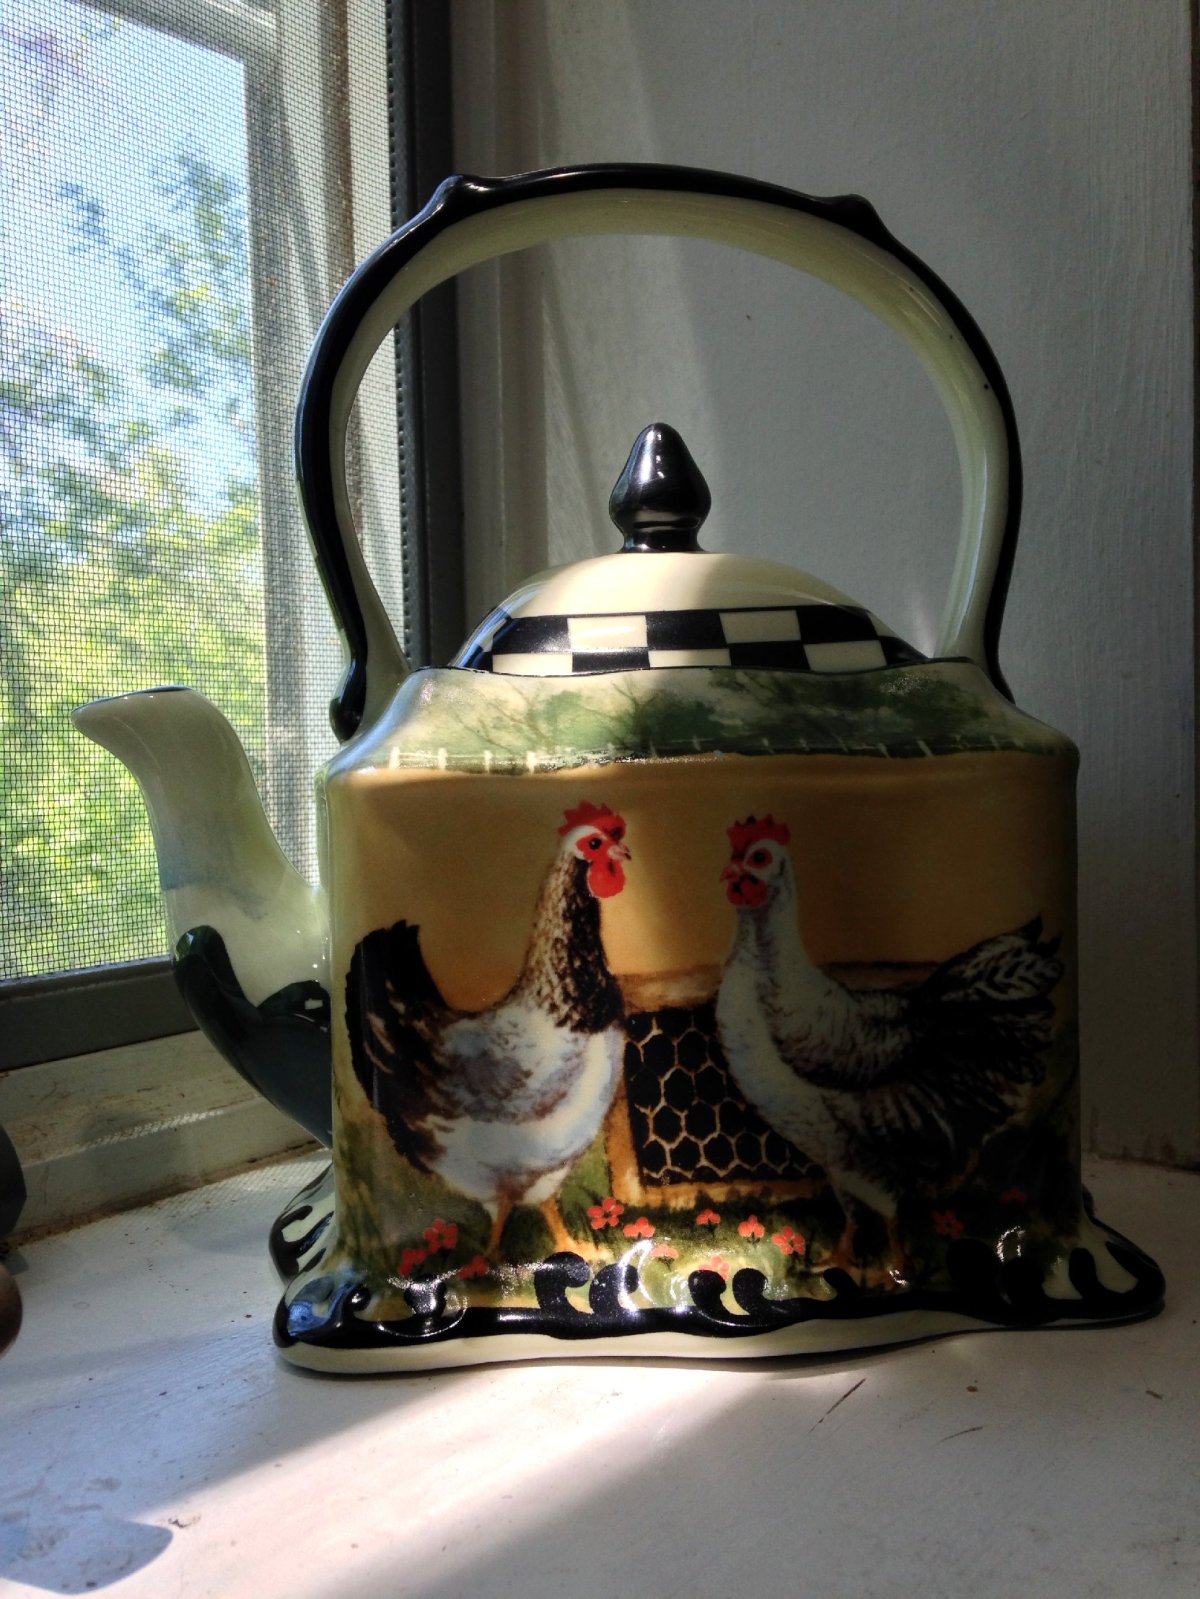 The Chicken Teapot and the Fantastically Lovely Day